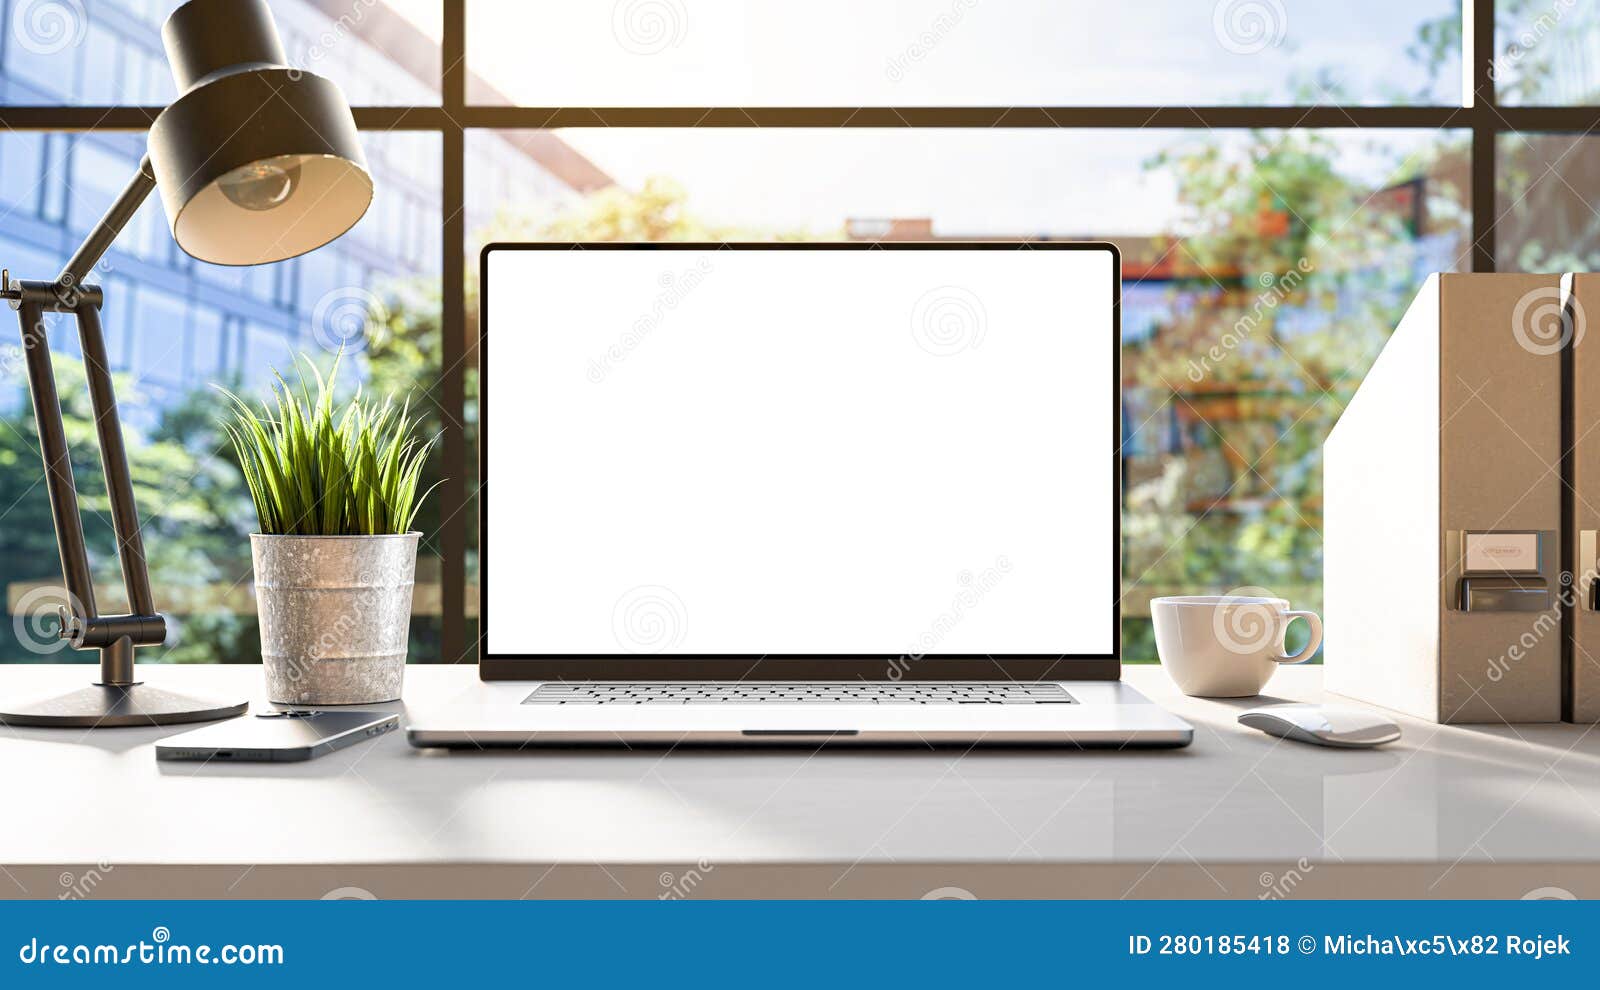 a laptop with a blank frameless screen mockup template is positioned on a table in an office interior, offering a front view, with